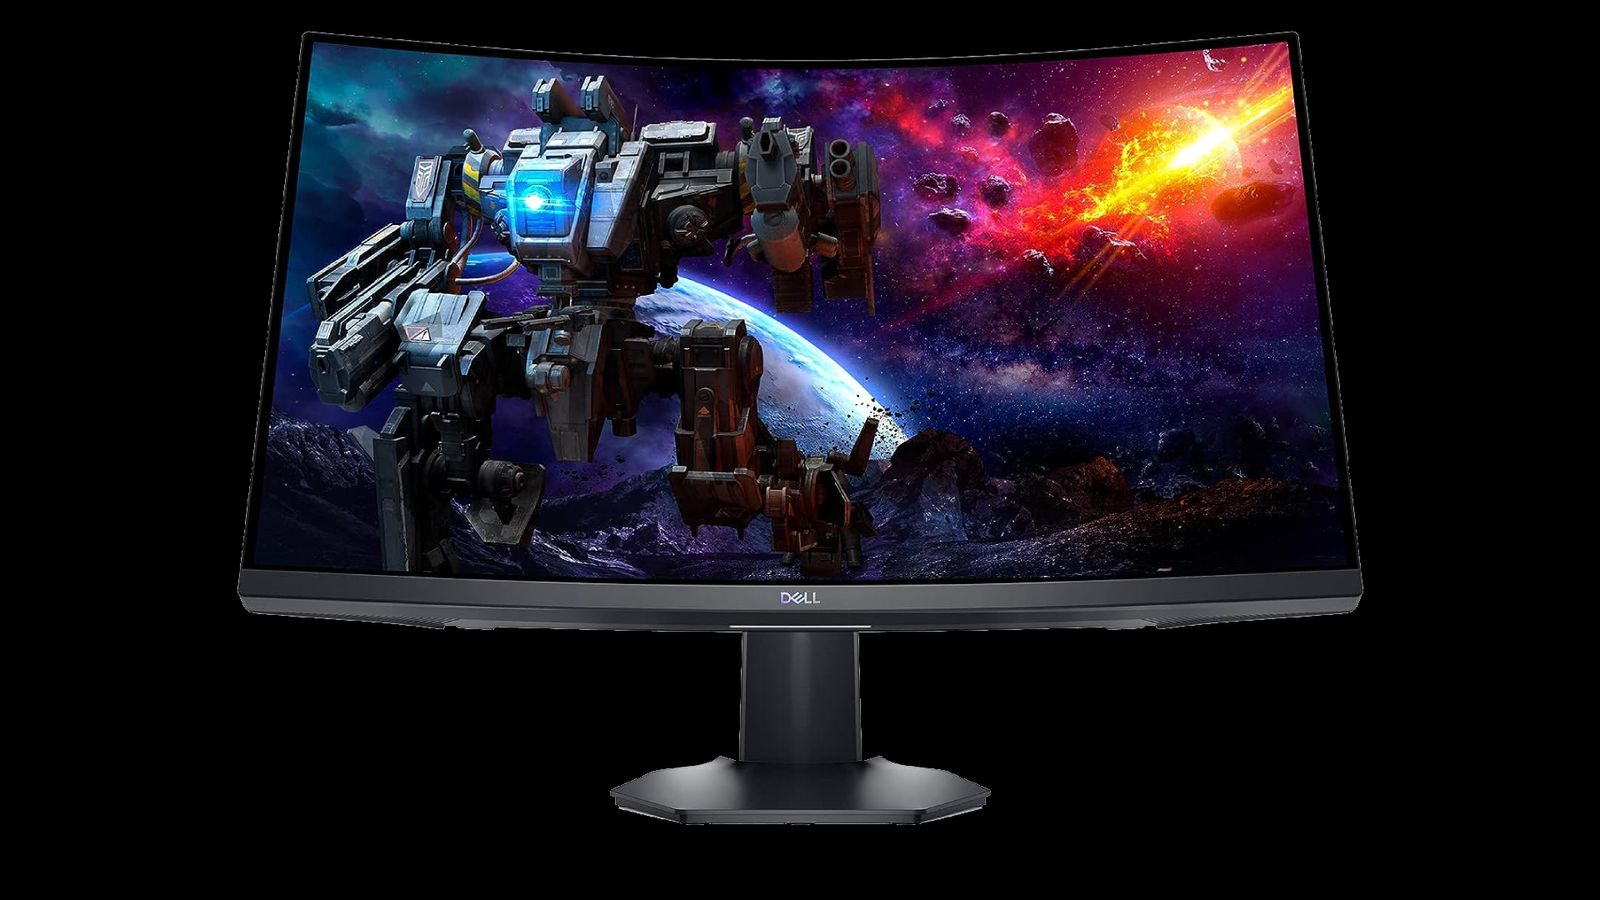 Dell S2722DGM product image of a black monitor with a robot in space on the display.